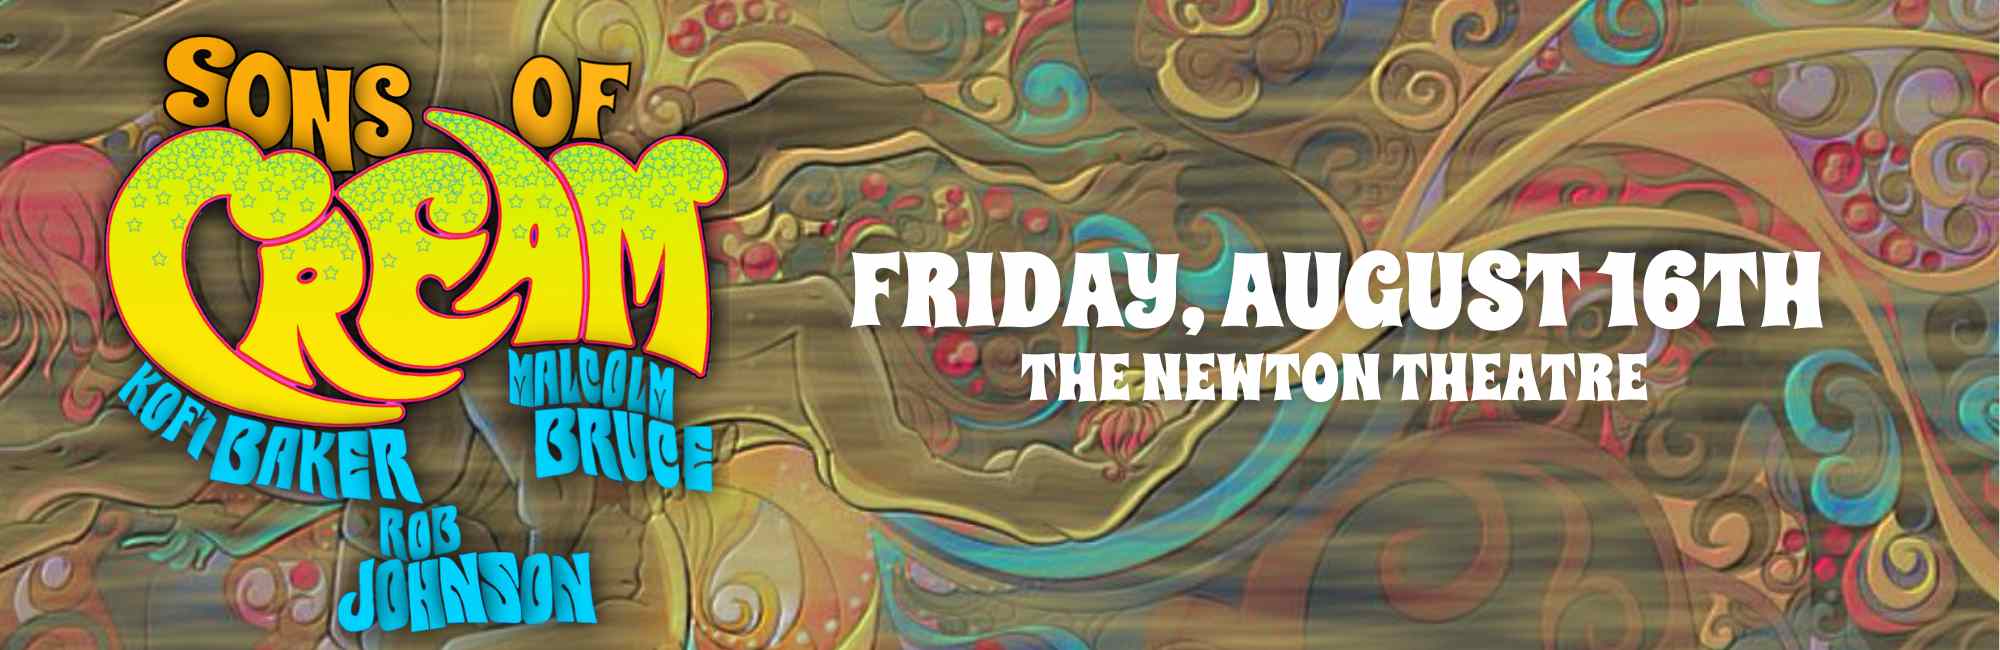 Sons of Cream plays at The Newton Theatre on Friday, August 16th.